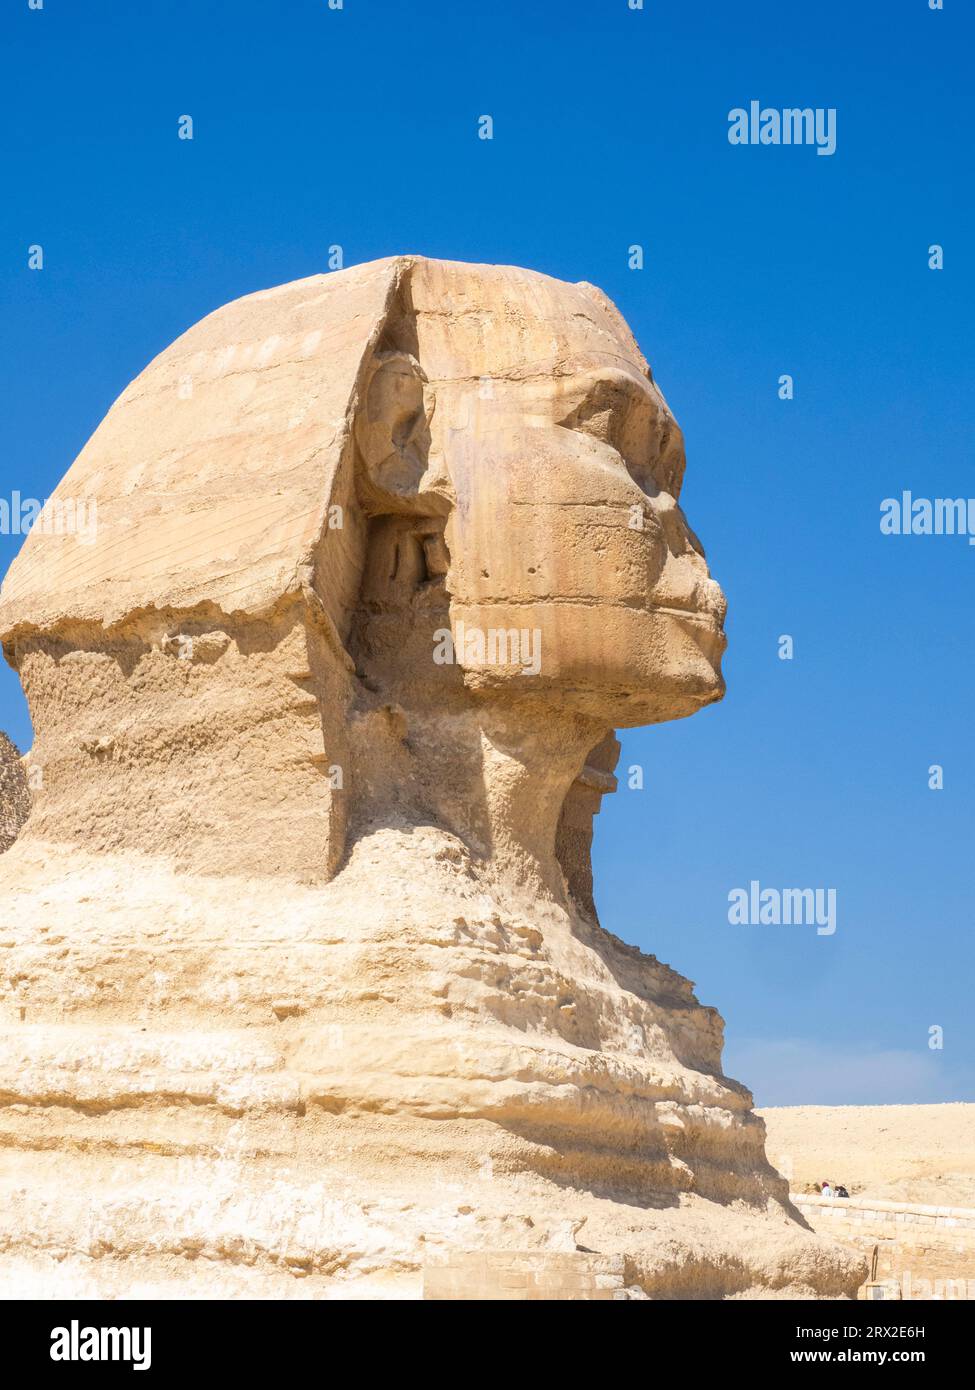 The Great Sphinx of Giza near the Great Pyramid of Giza, the oldest of the Seven Wonders of the World, near Cairo, Egypt Africa Stock Photo